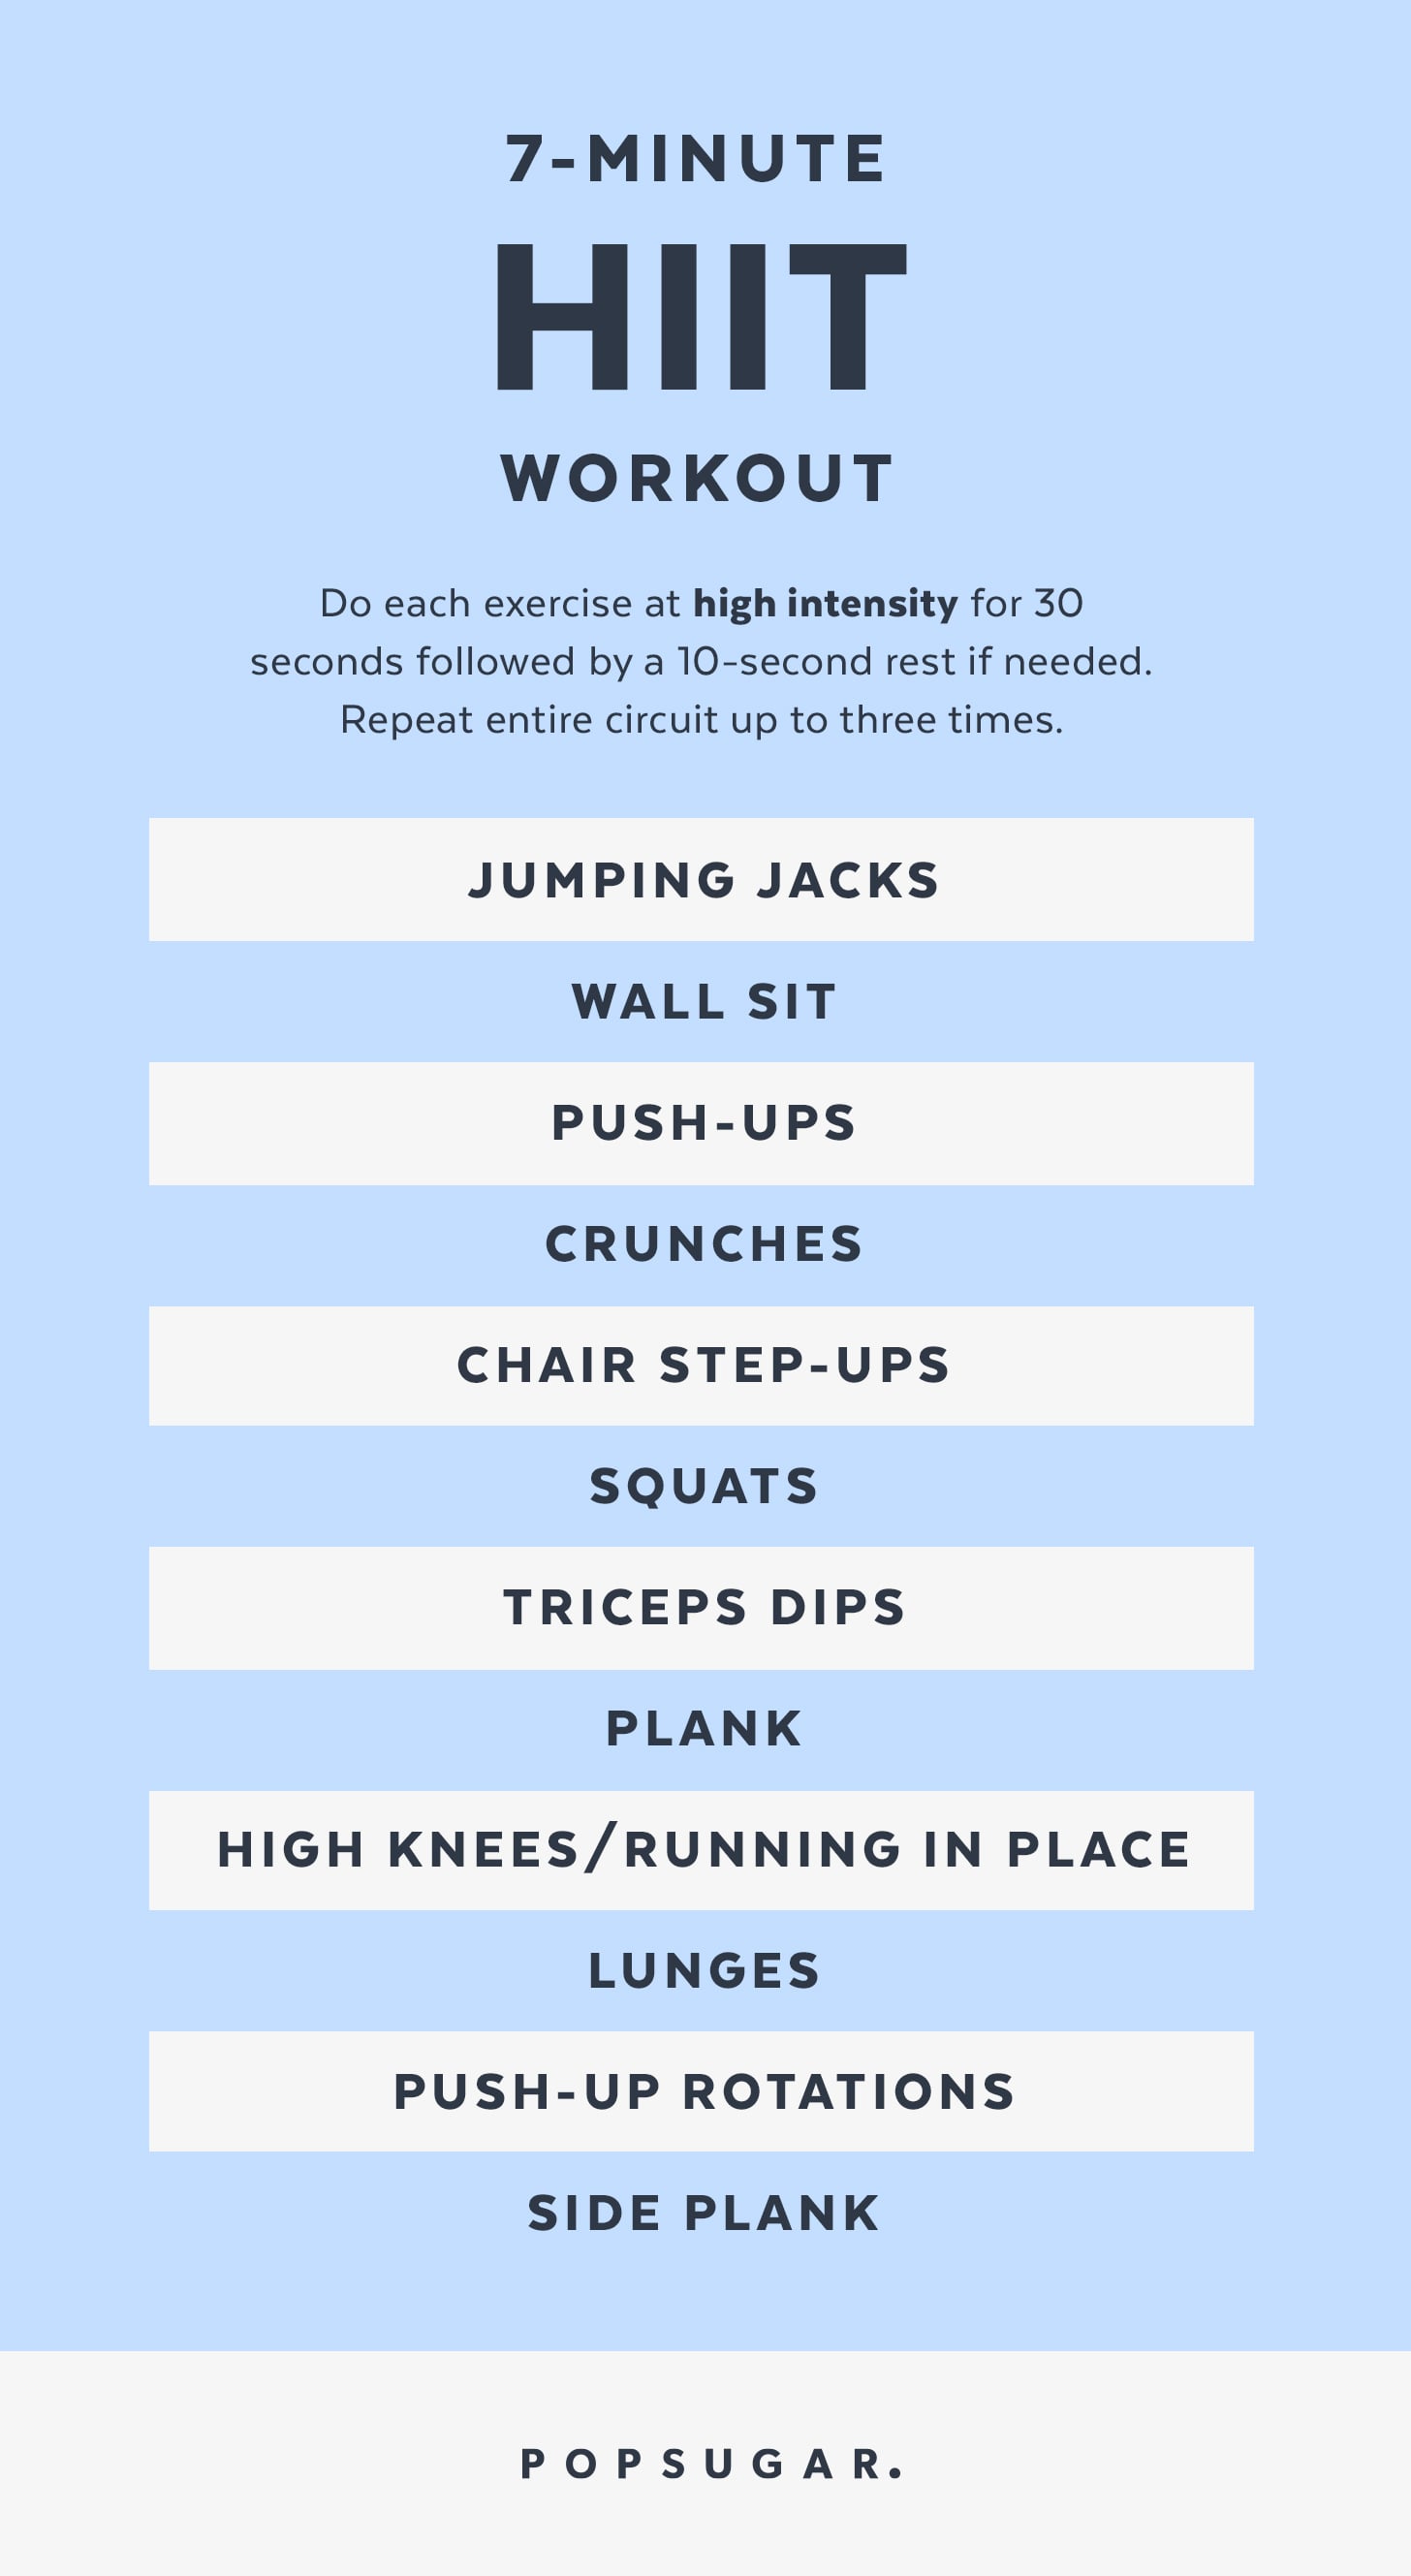 HIIT workouts